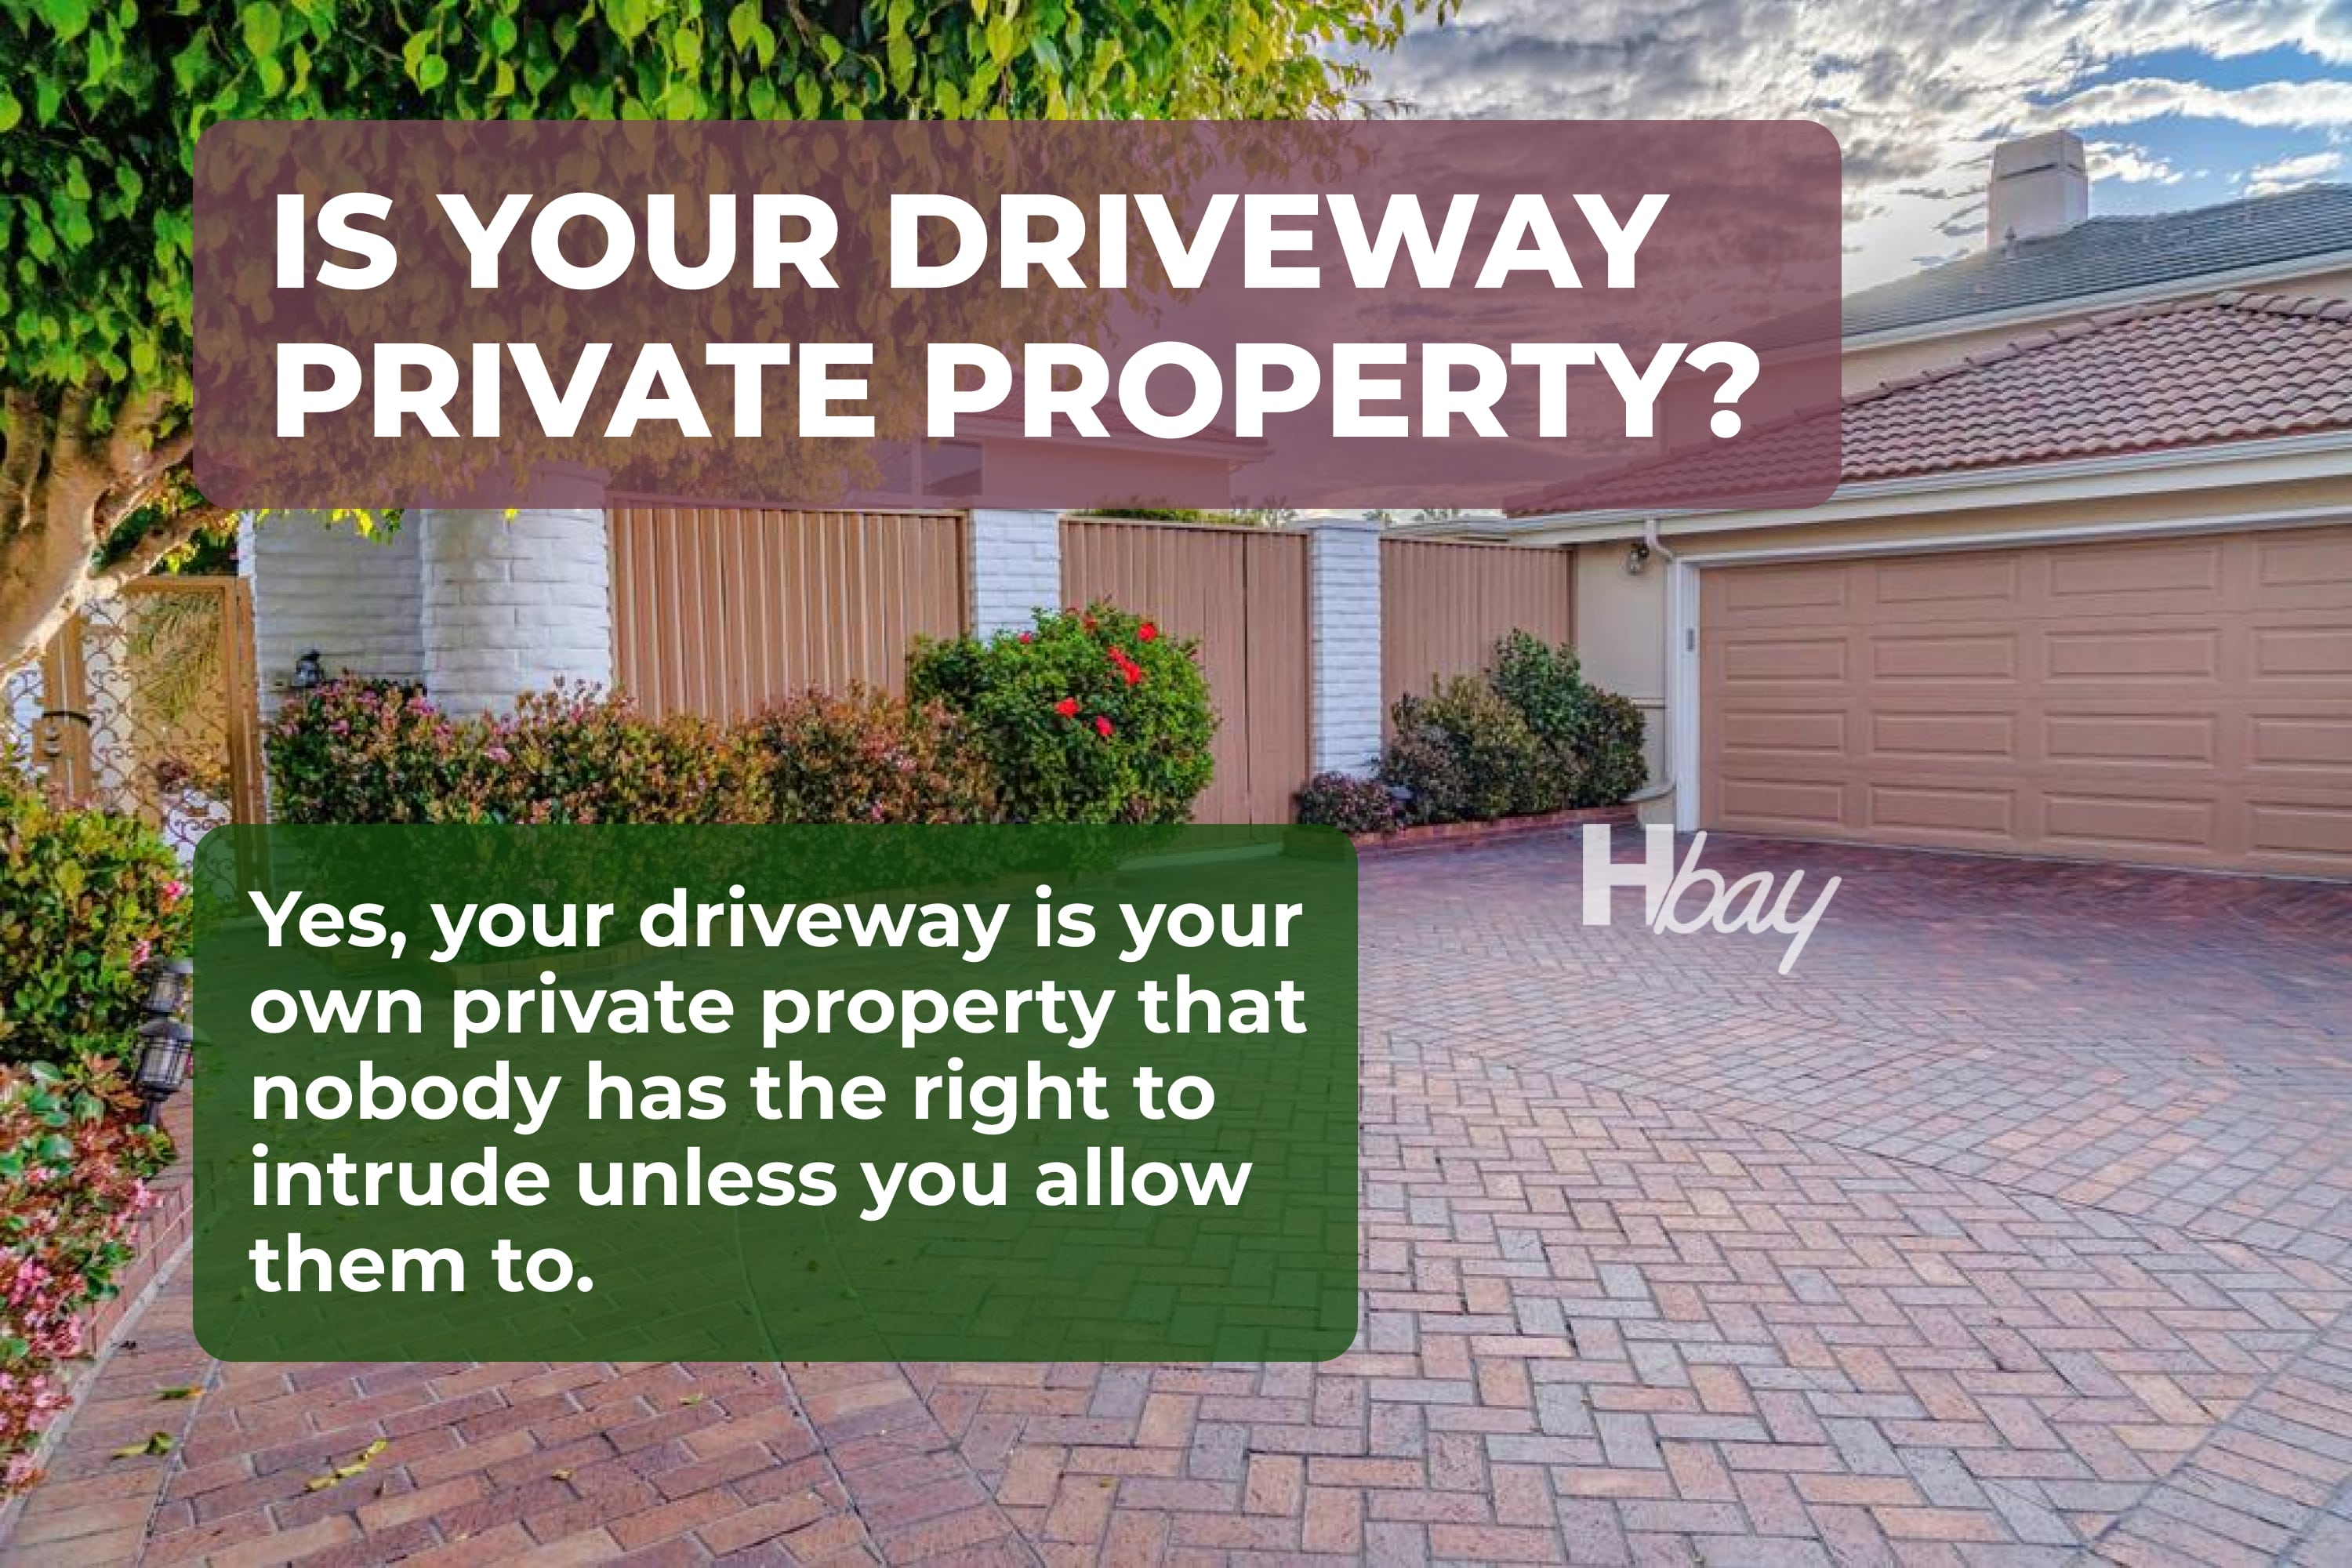 Is your driveway private property